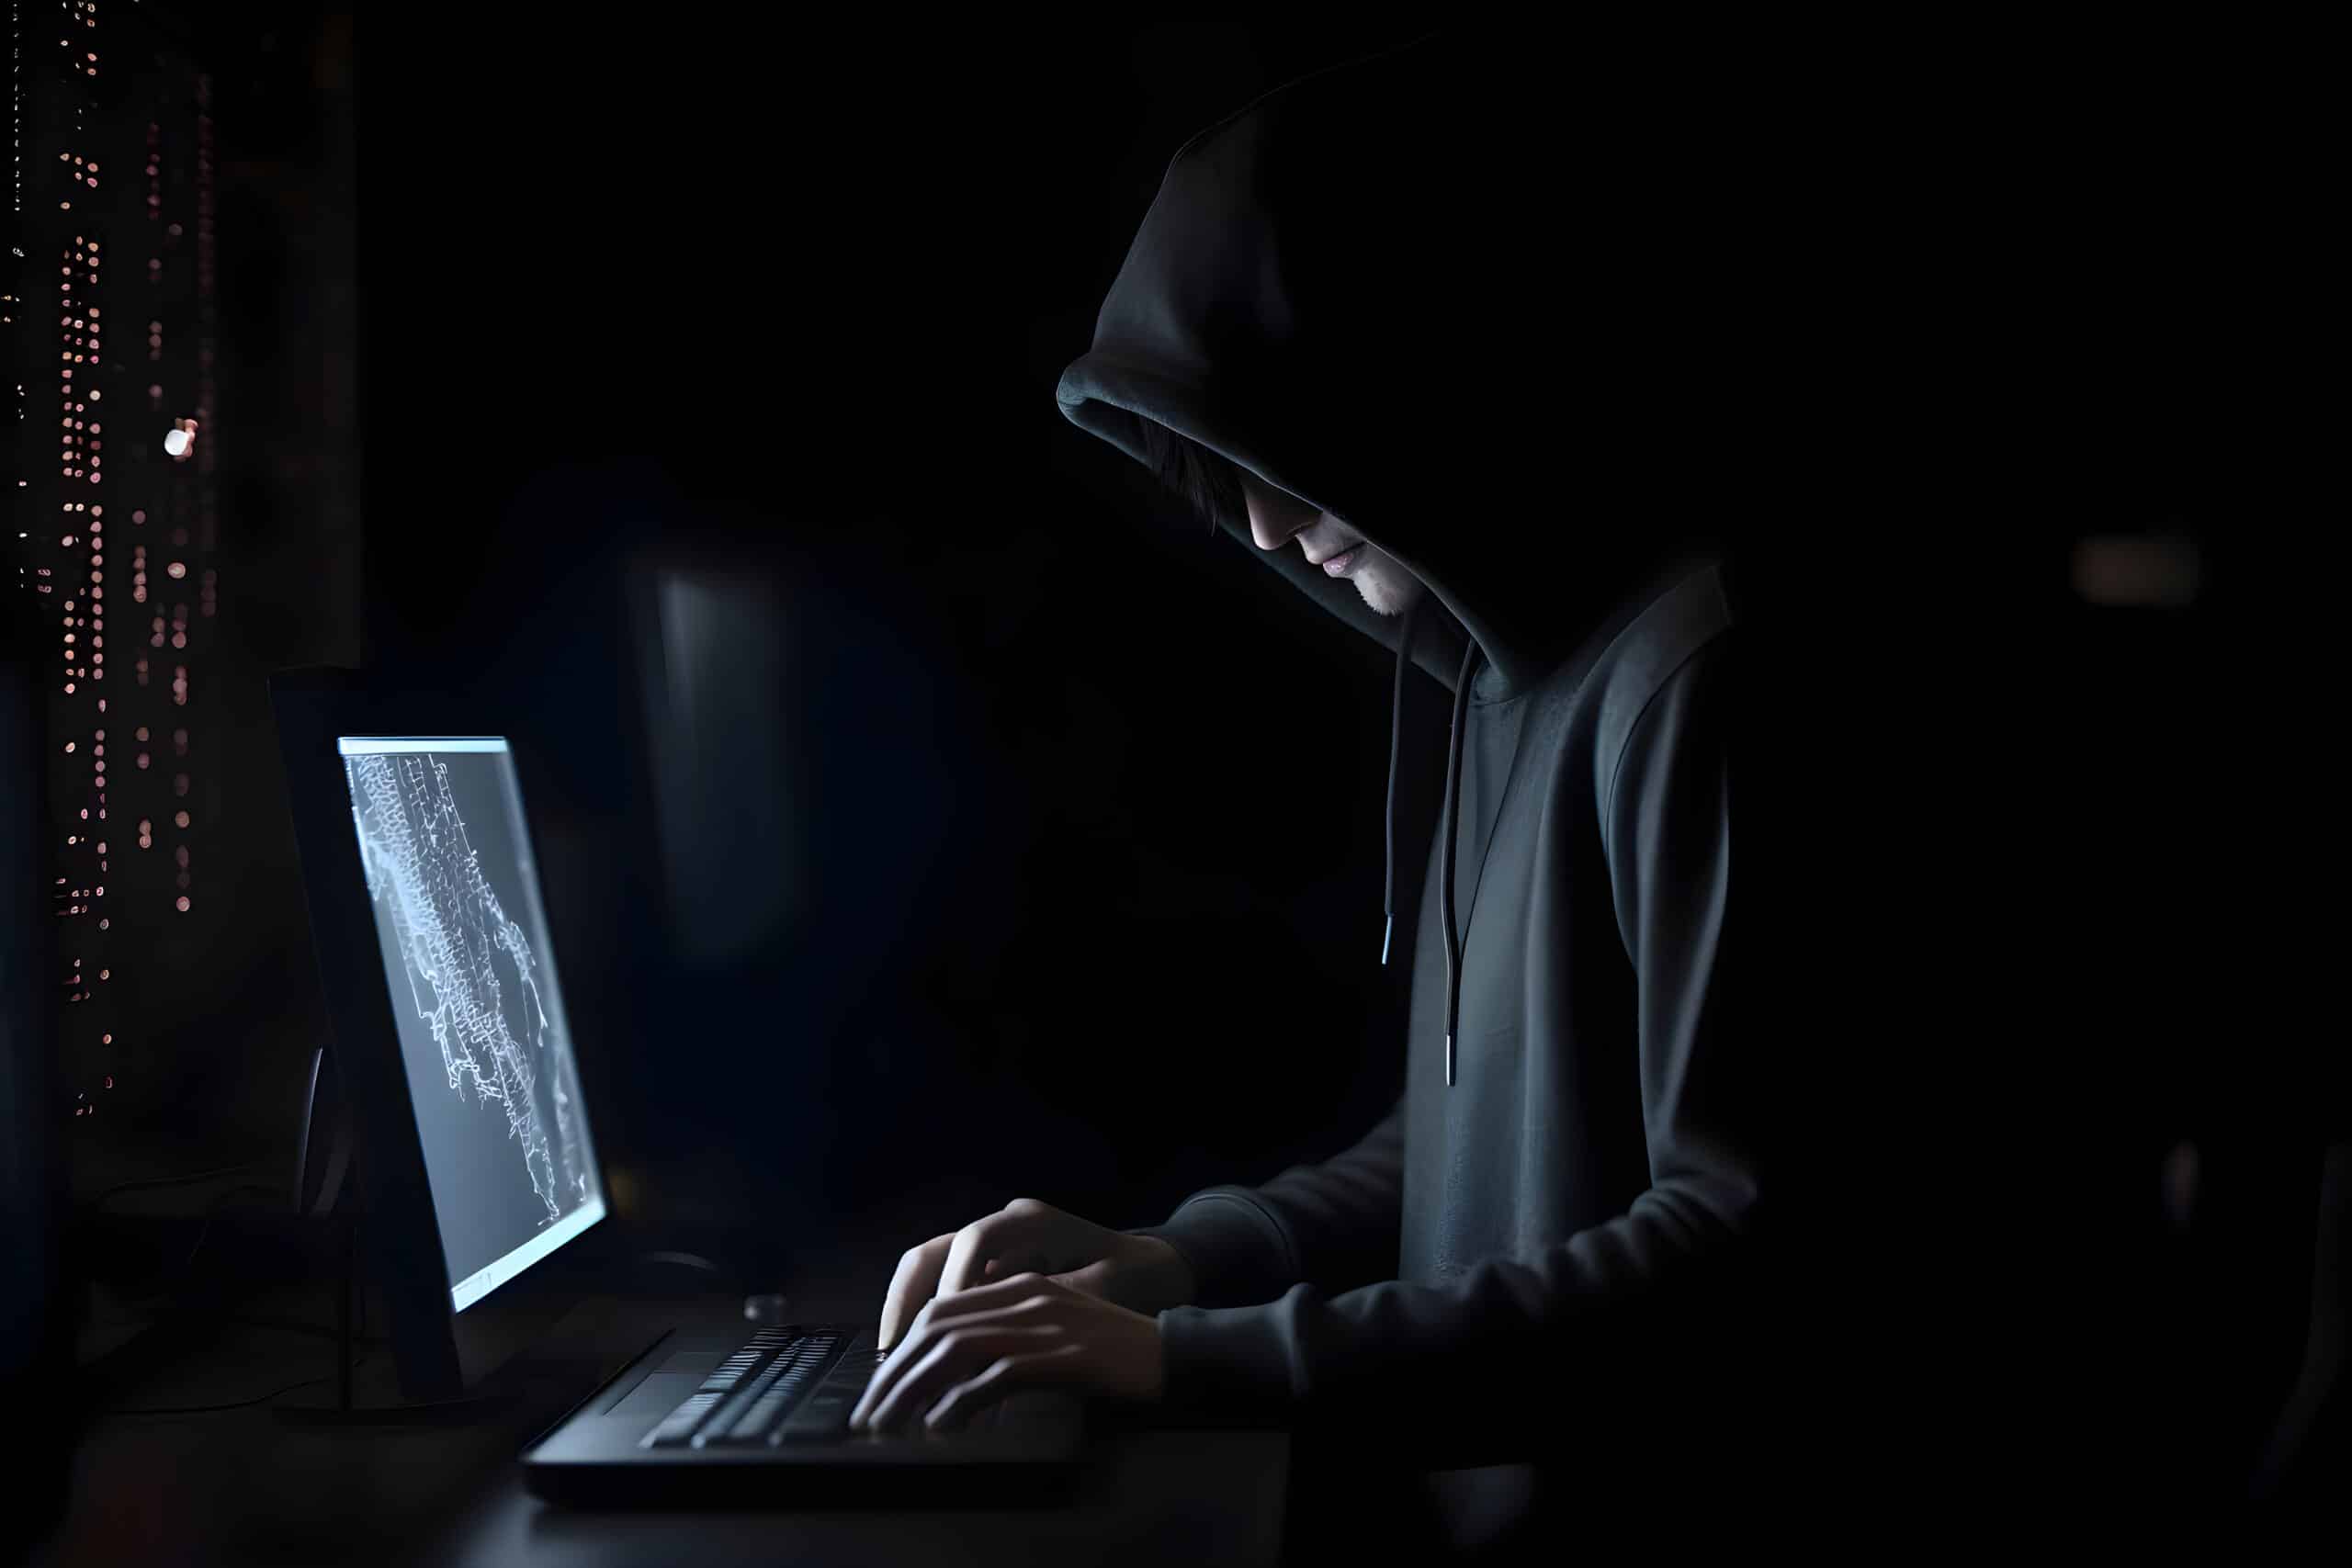 Hooded hacker stealing data from a computer. Dark background.